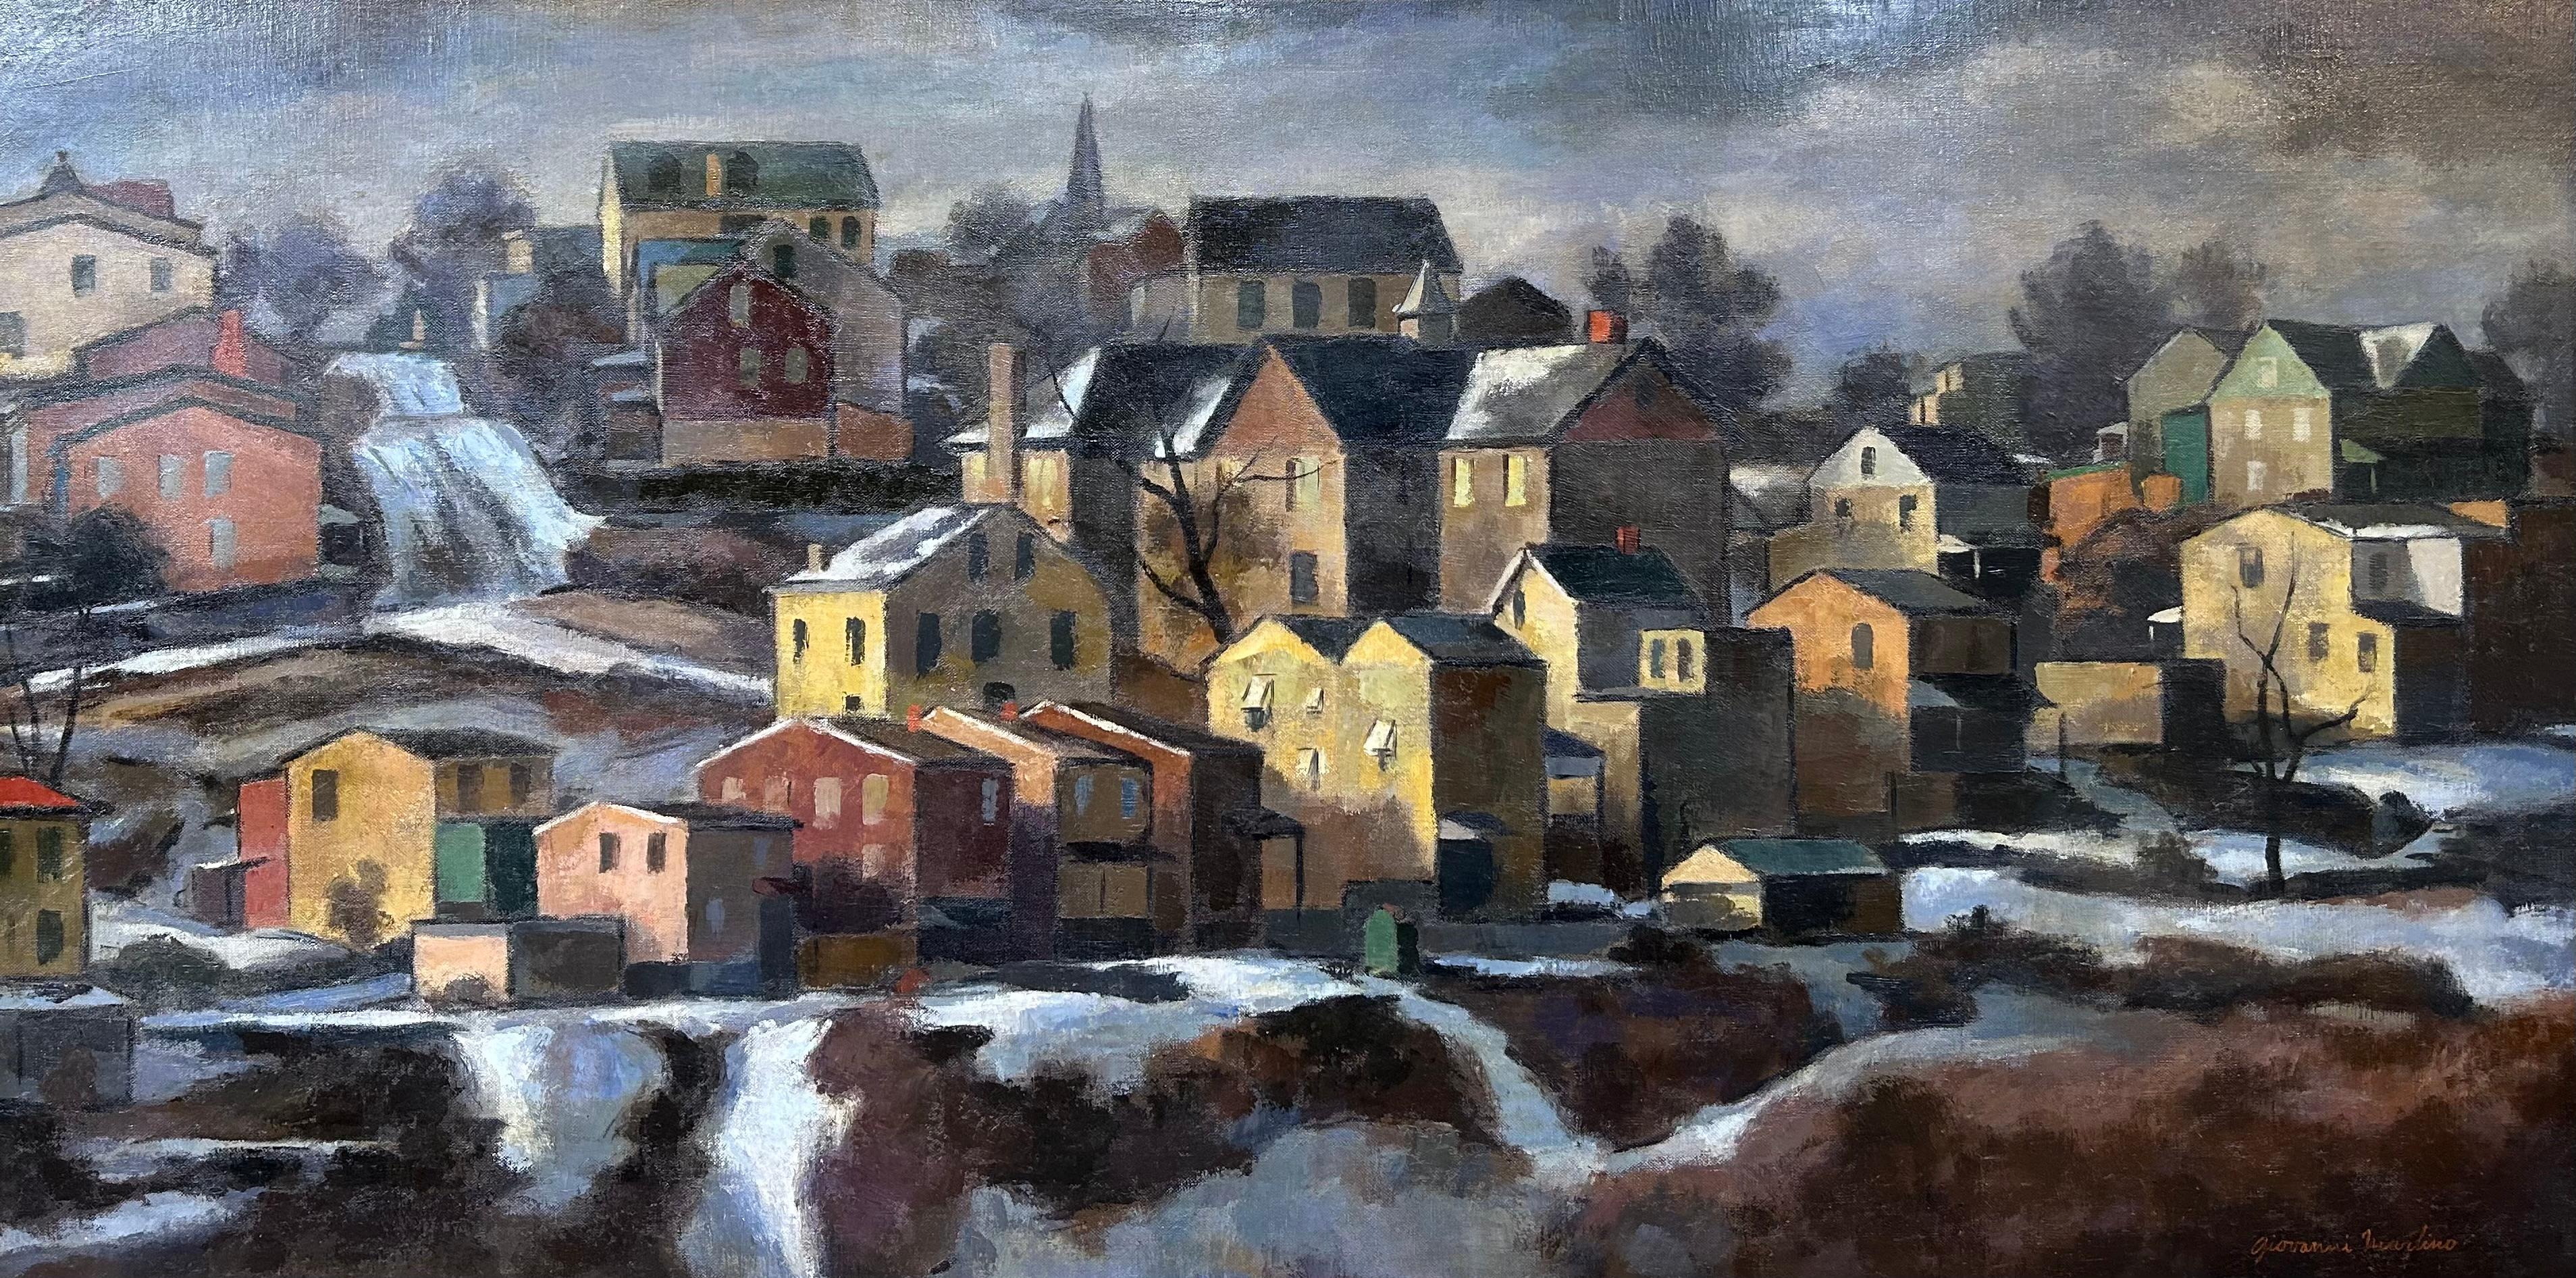 Giovanni Martino Landscape Painting - Manayunk Houses, Regional American Cityscape by Pennsylvania Impressionist